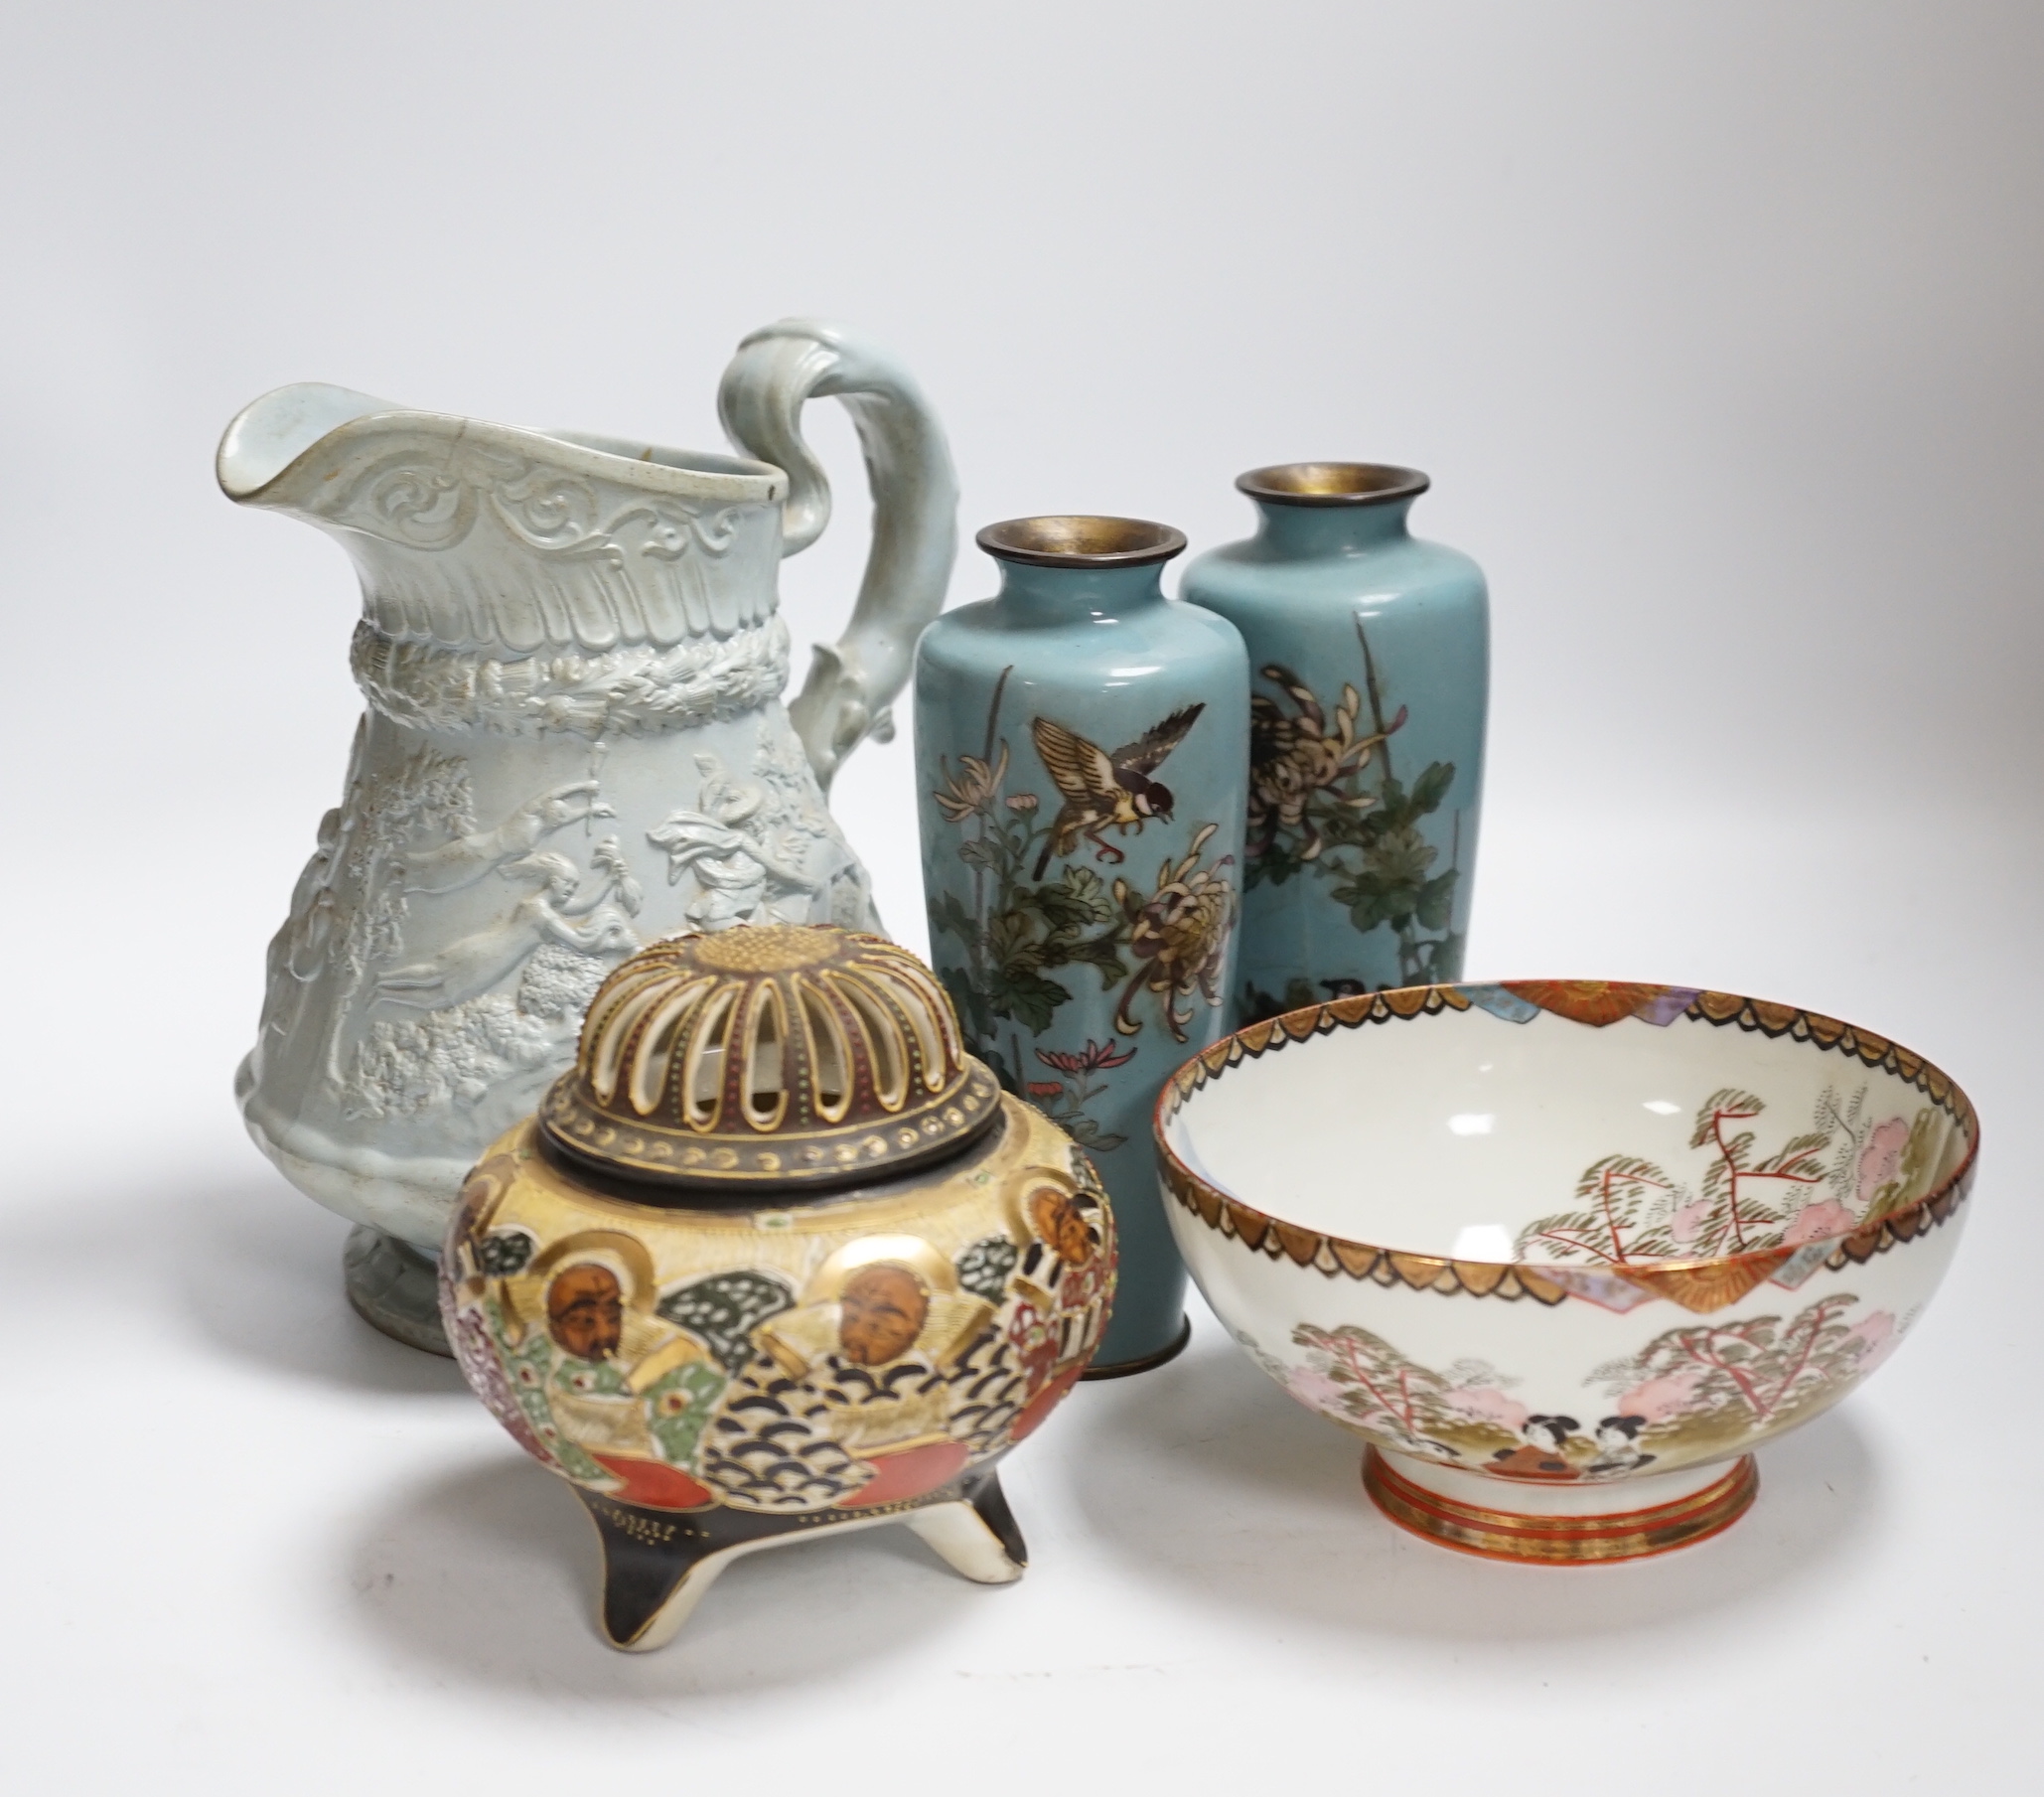 A quantity of various collectables including Japanese porcelain, plated wares, studio pottery etc. - Image 6 of 10